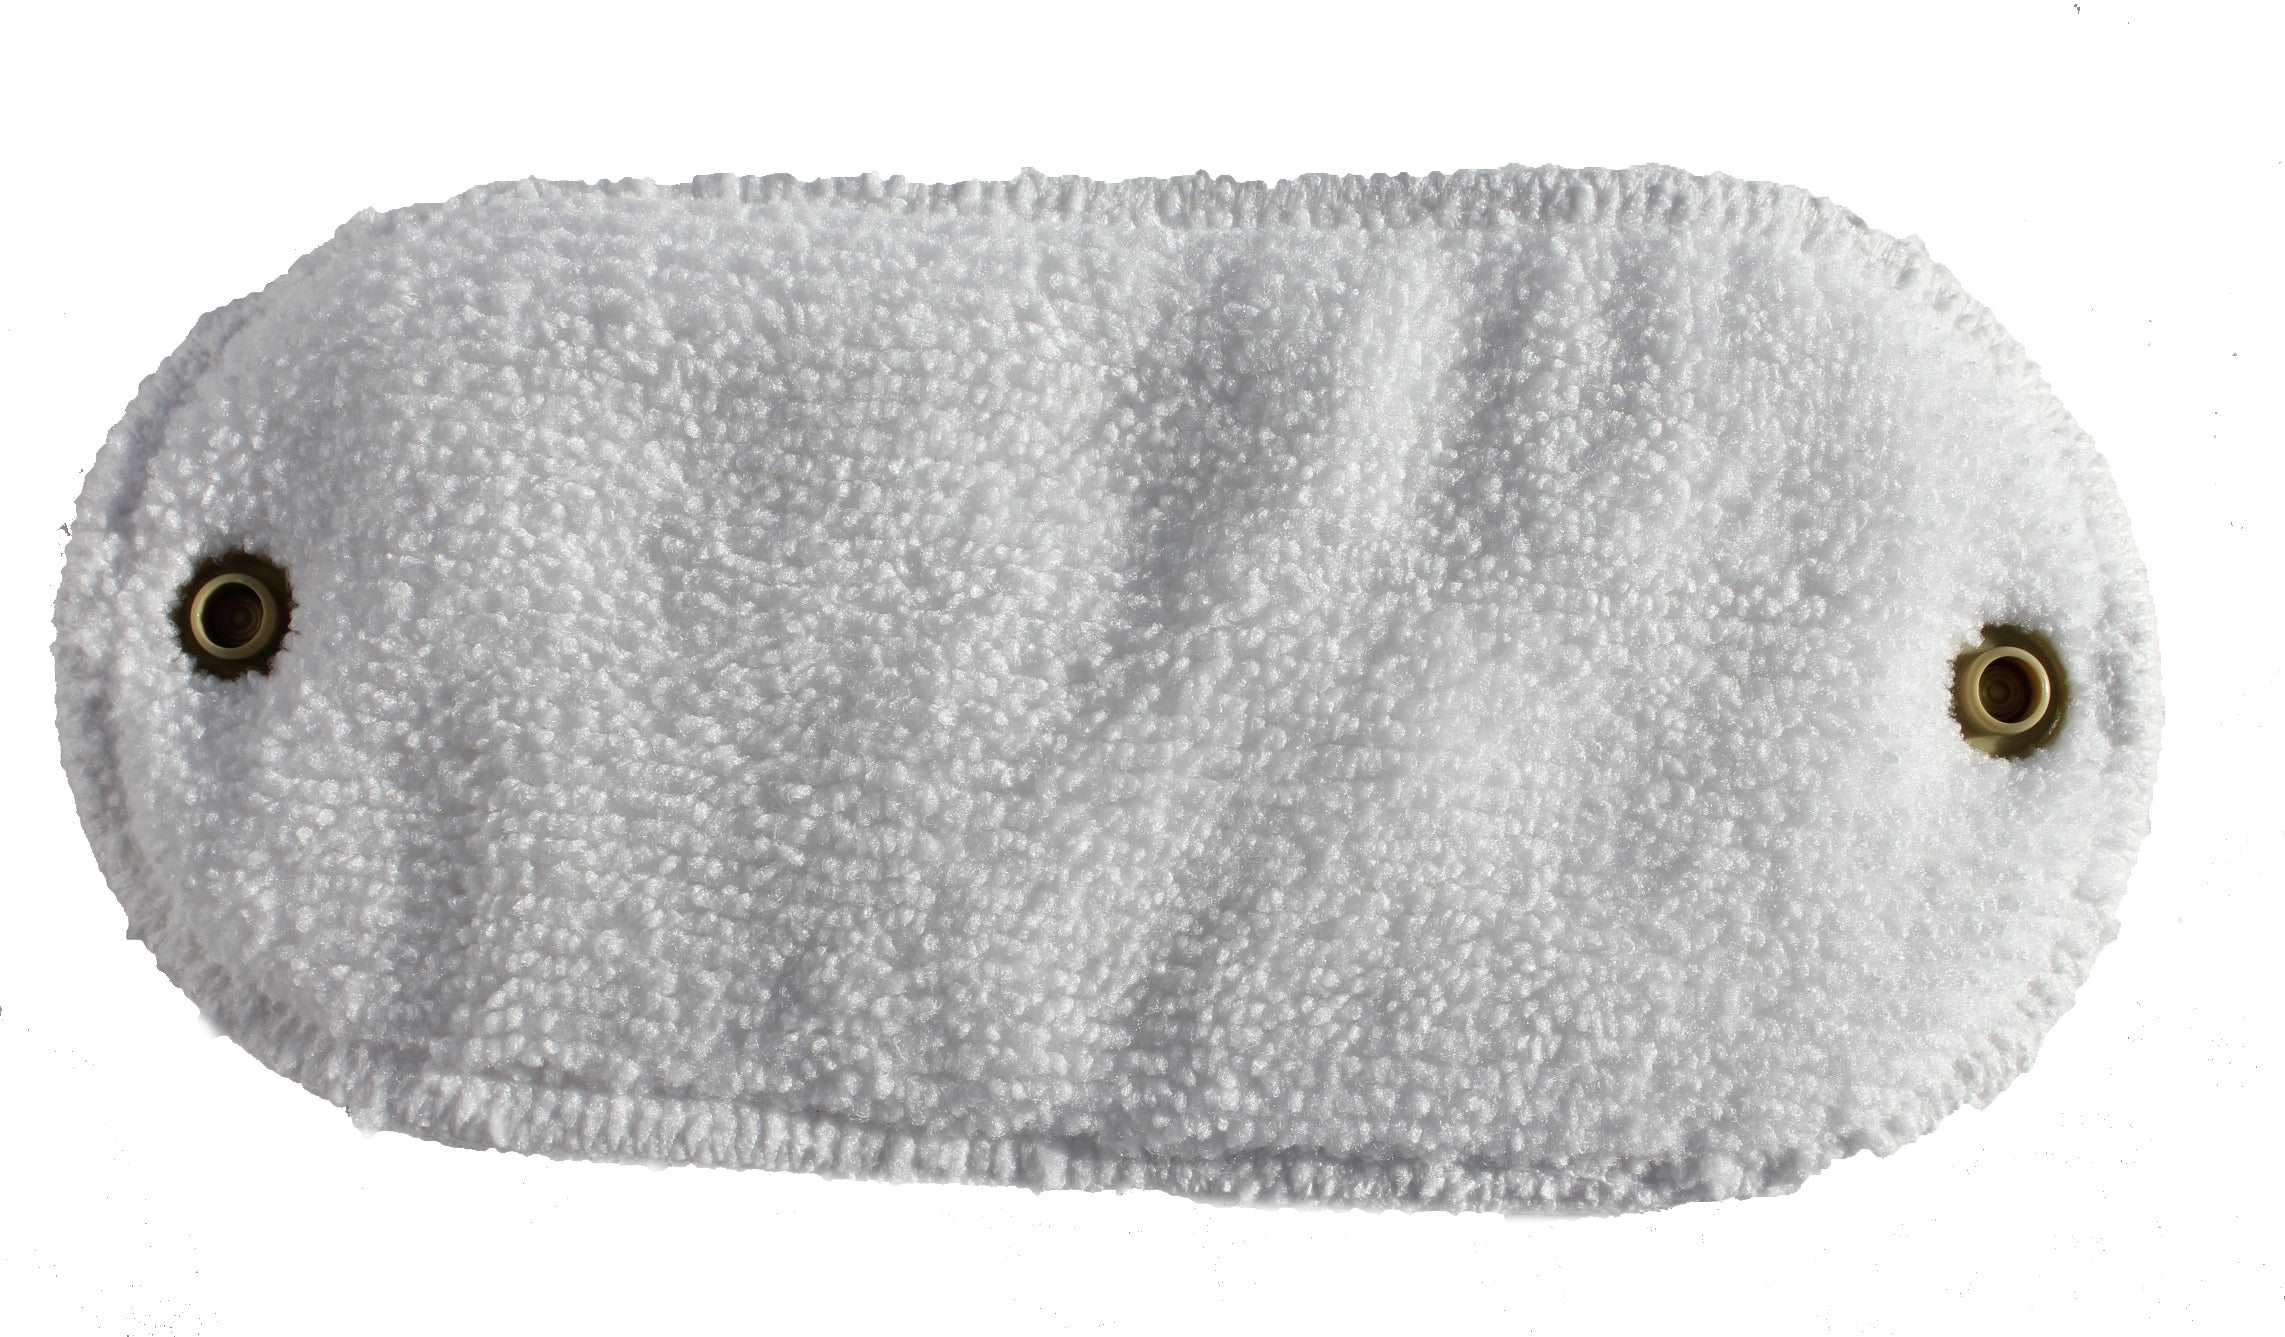 Washable Popper Pads